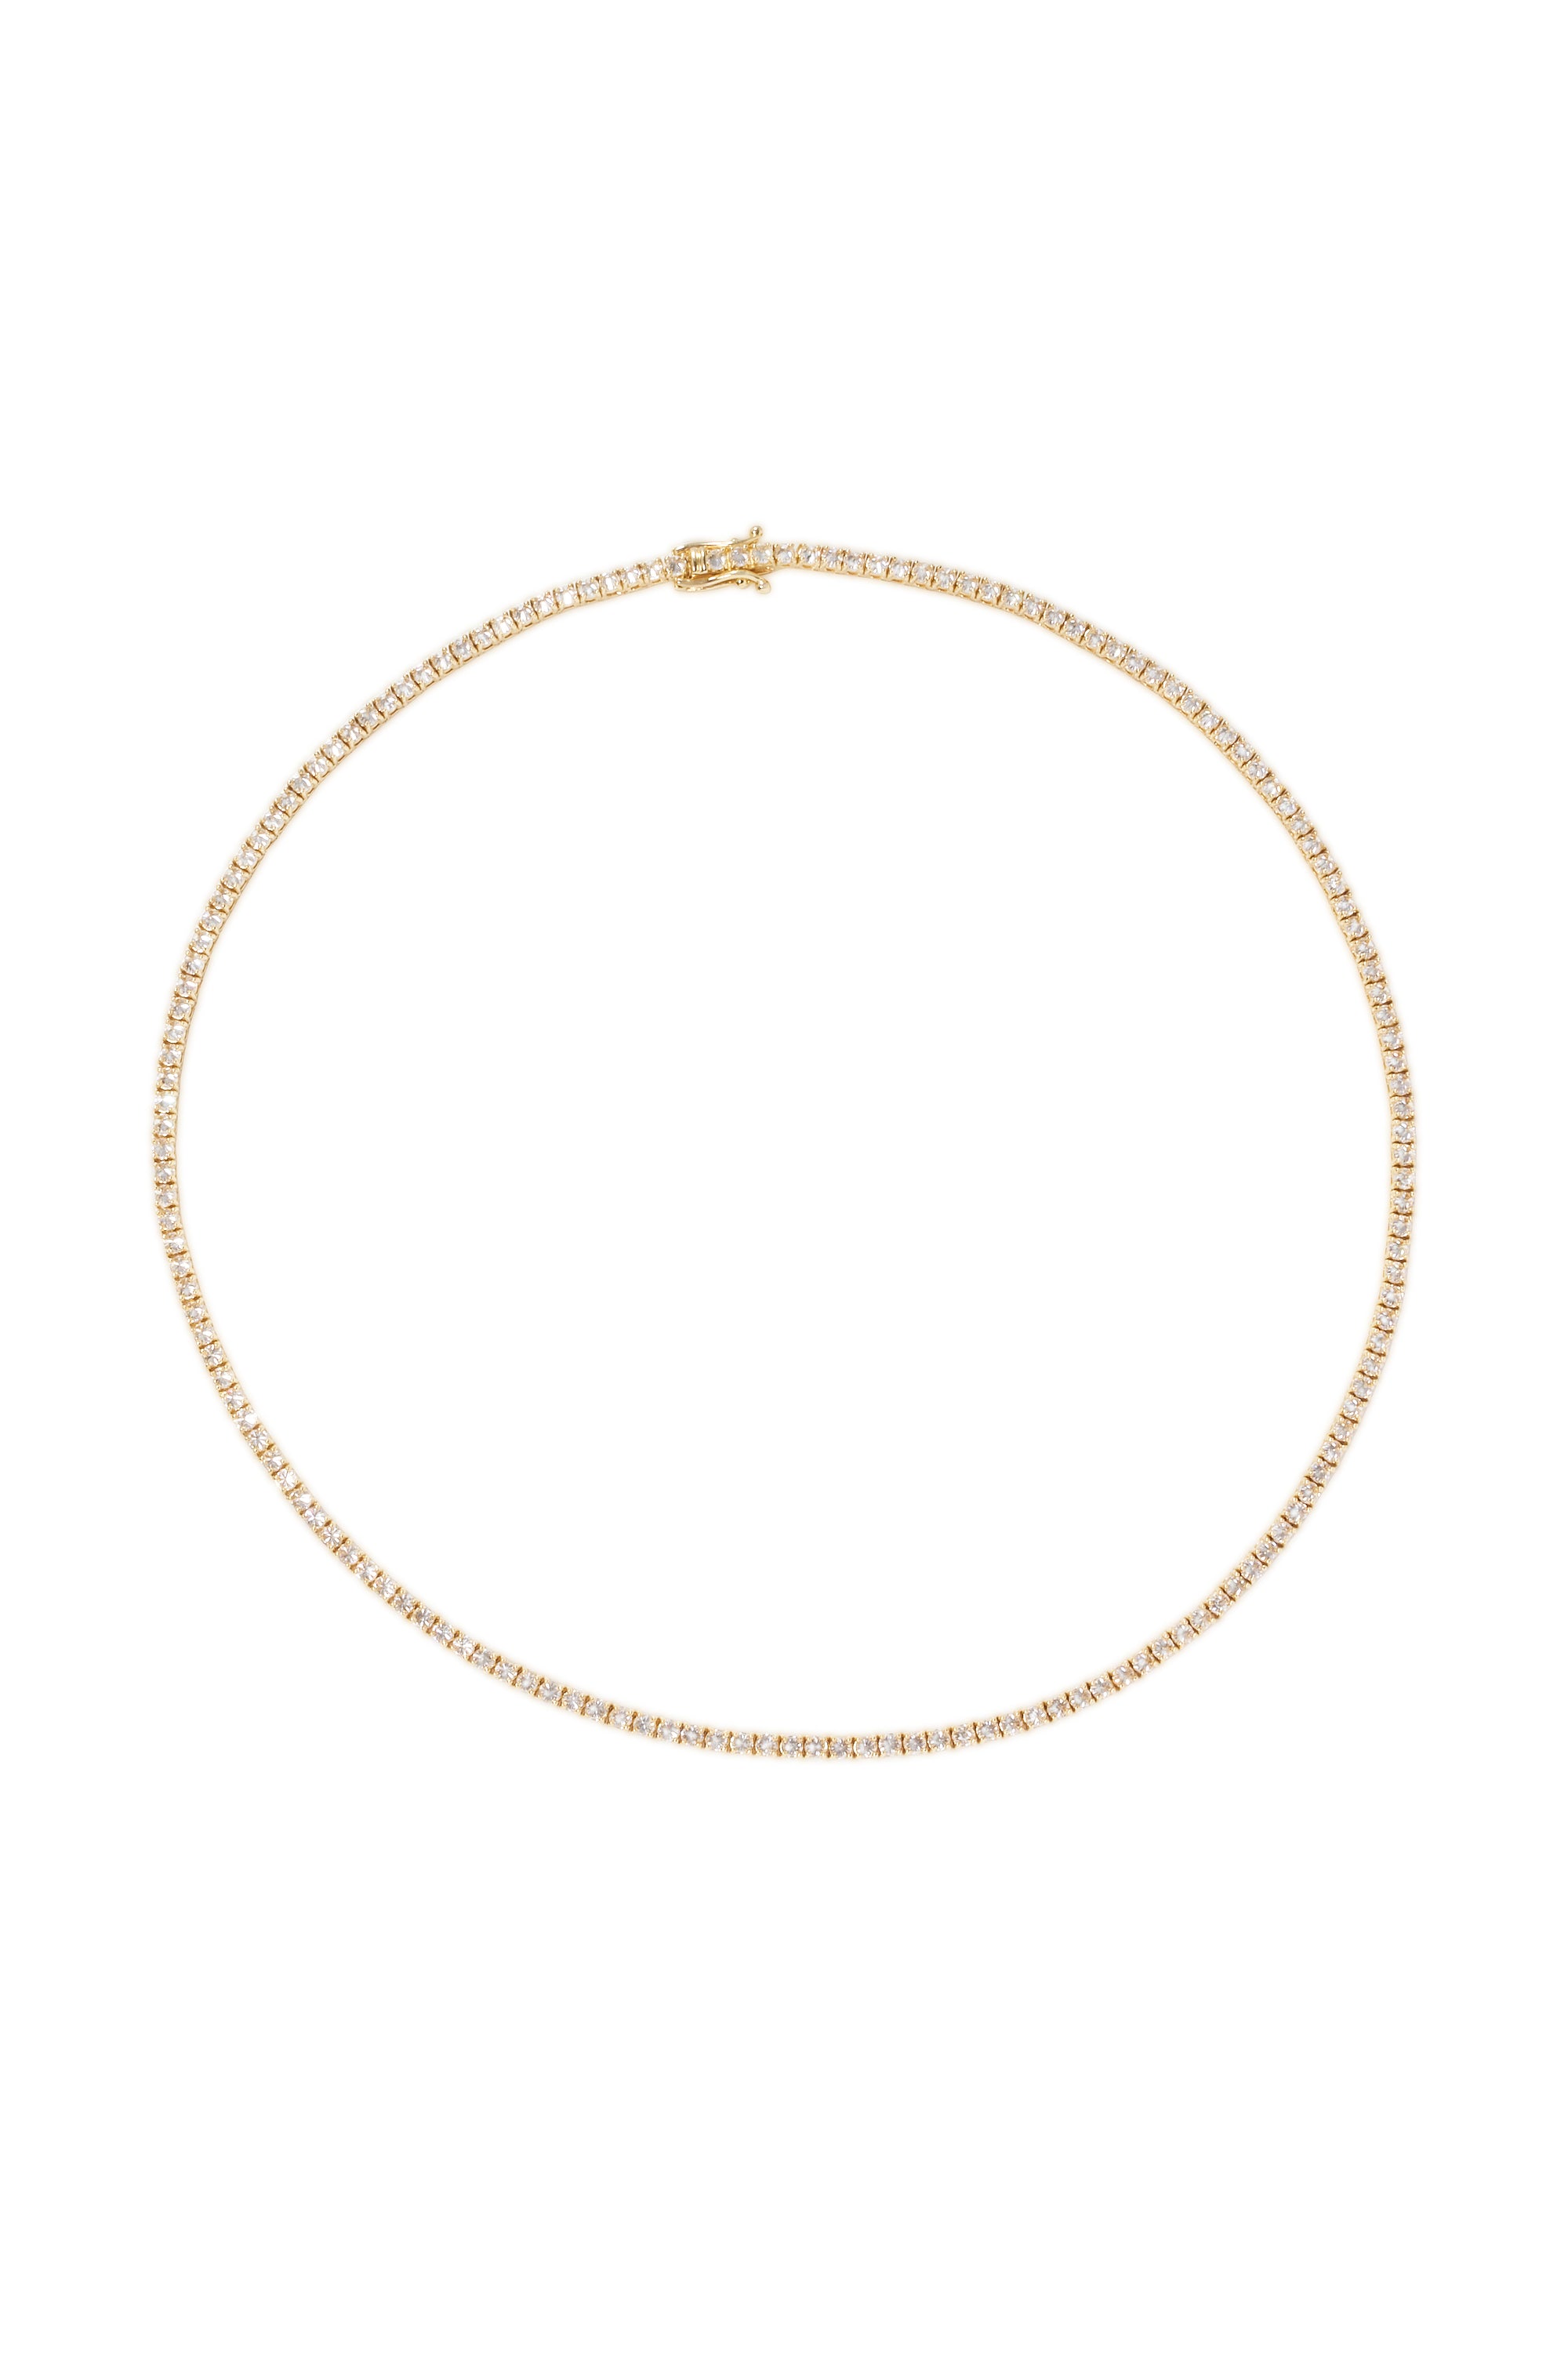 Reverse set Canadian diamond tennic necklace in 18K yellow gold